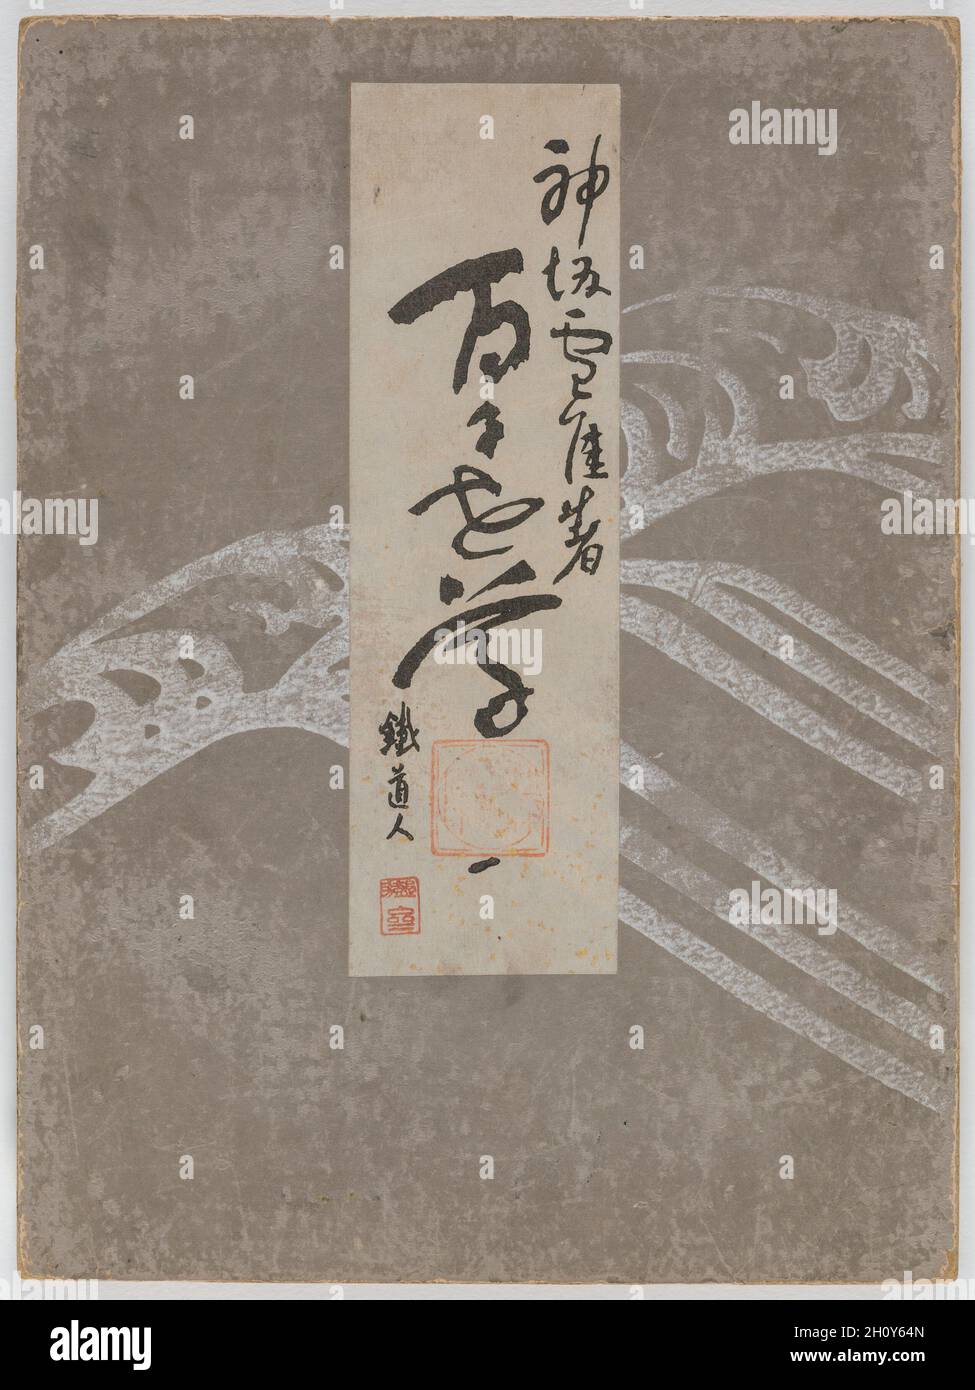 Flowers of a Hundred Worlds (Momoyogusa), Vol. 1, 1909-10. Kamisaka Sekka (Japanese, 1866-1942). Woodblock prints, ink, color, gold, and silver on paper; sheet: 29.9 x 22.1 cm (11 3/4 x 8 11/16 in.).  This is the first of a set of three woodblock printed albums by Kamisaka Sekka, the artist considered the last major exponent of the Rinpa style of painting and design associated with the artists Tawaraya S?tatsu (died about 1640) and Ogata K?rin (1658-1716). Momoyogusa, in addition to meaning 'flowers of a hundred worlds,' is a classical name for the chrysanthemum. It appears in a poem by Mimube Stock Photo